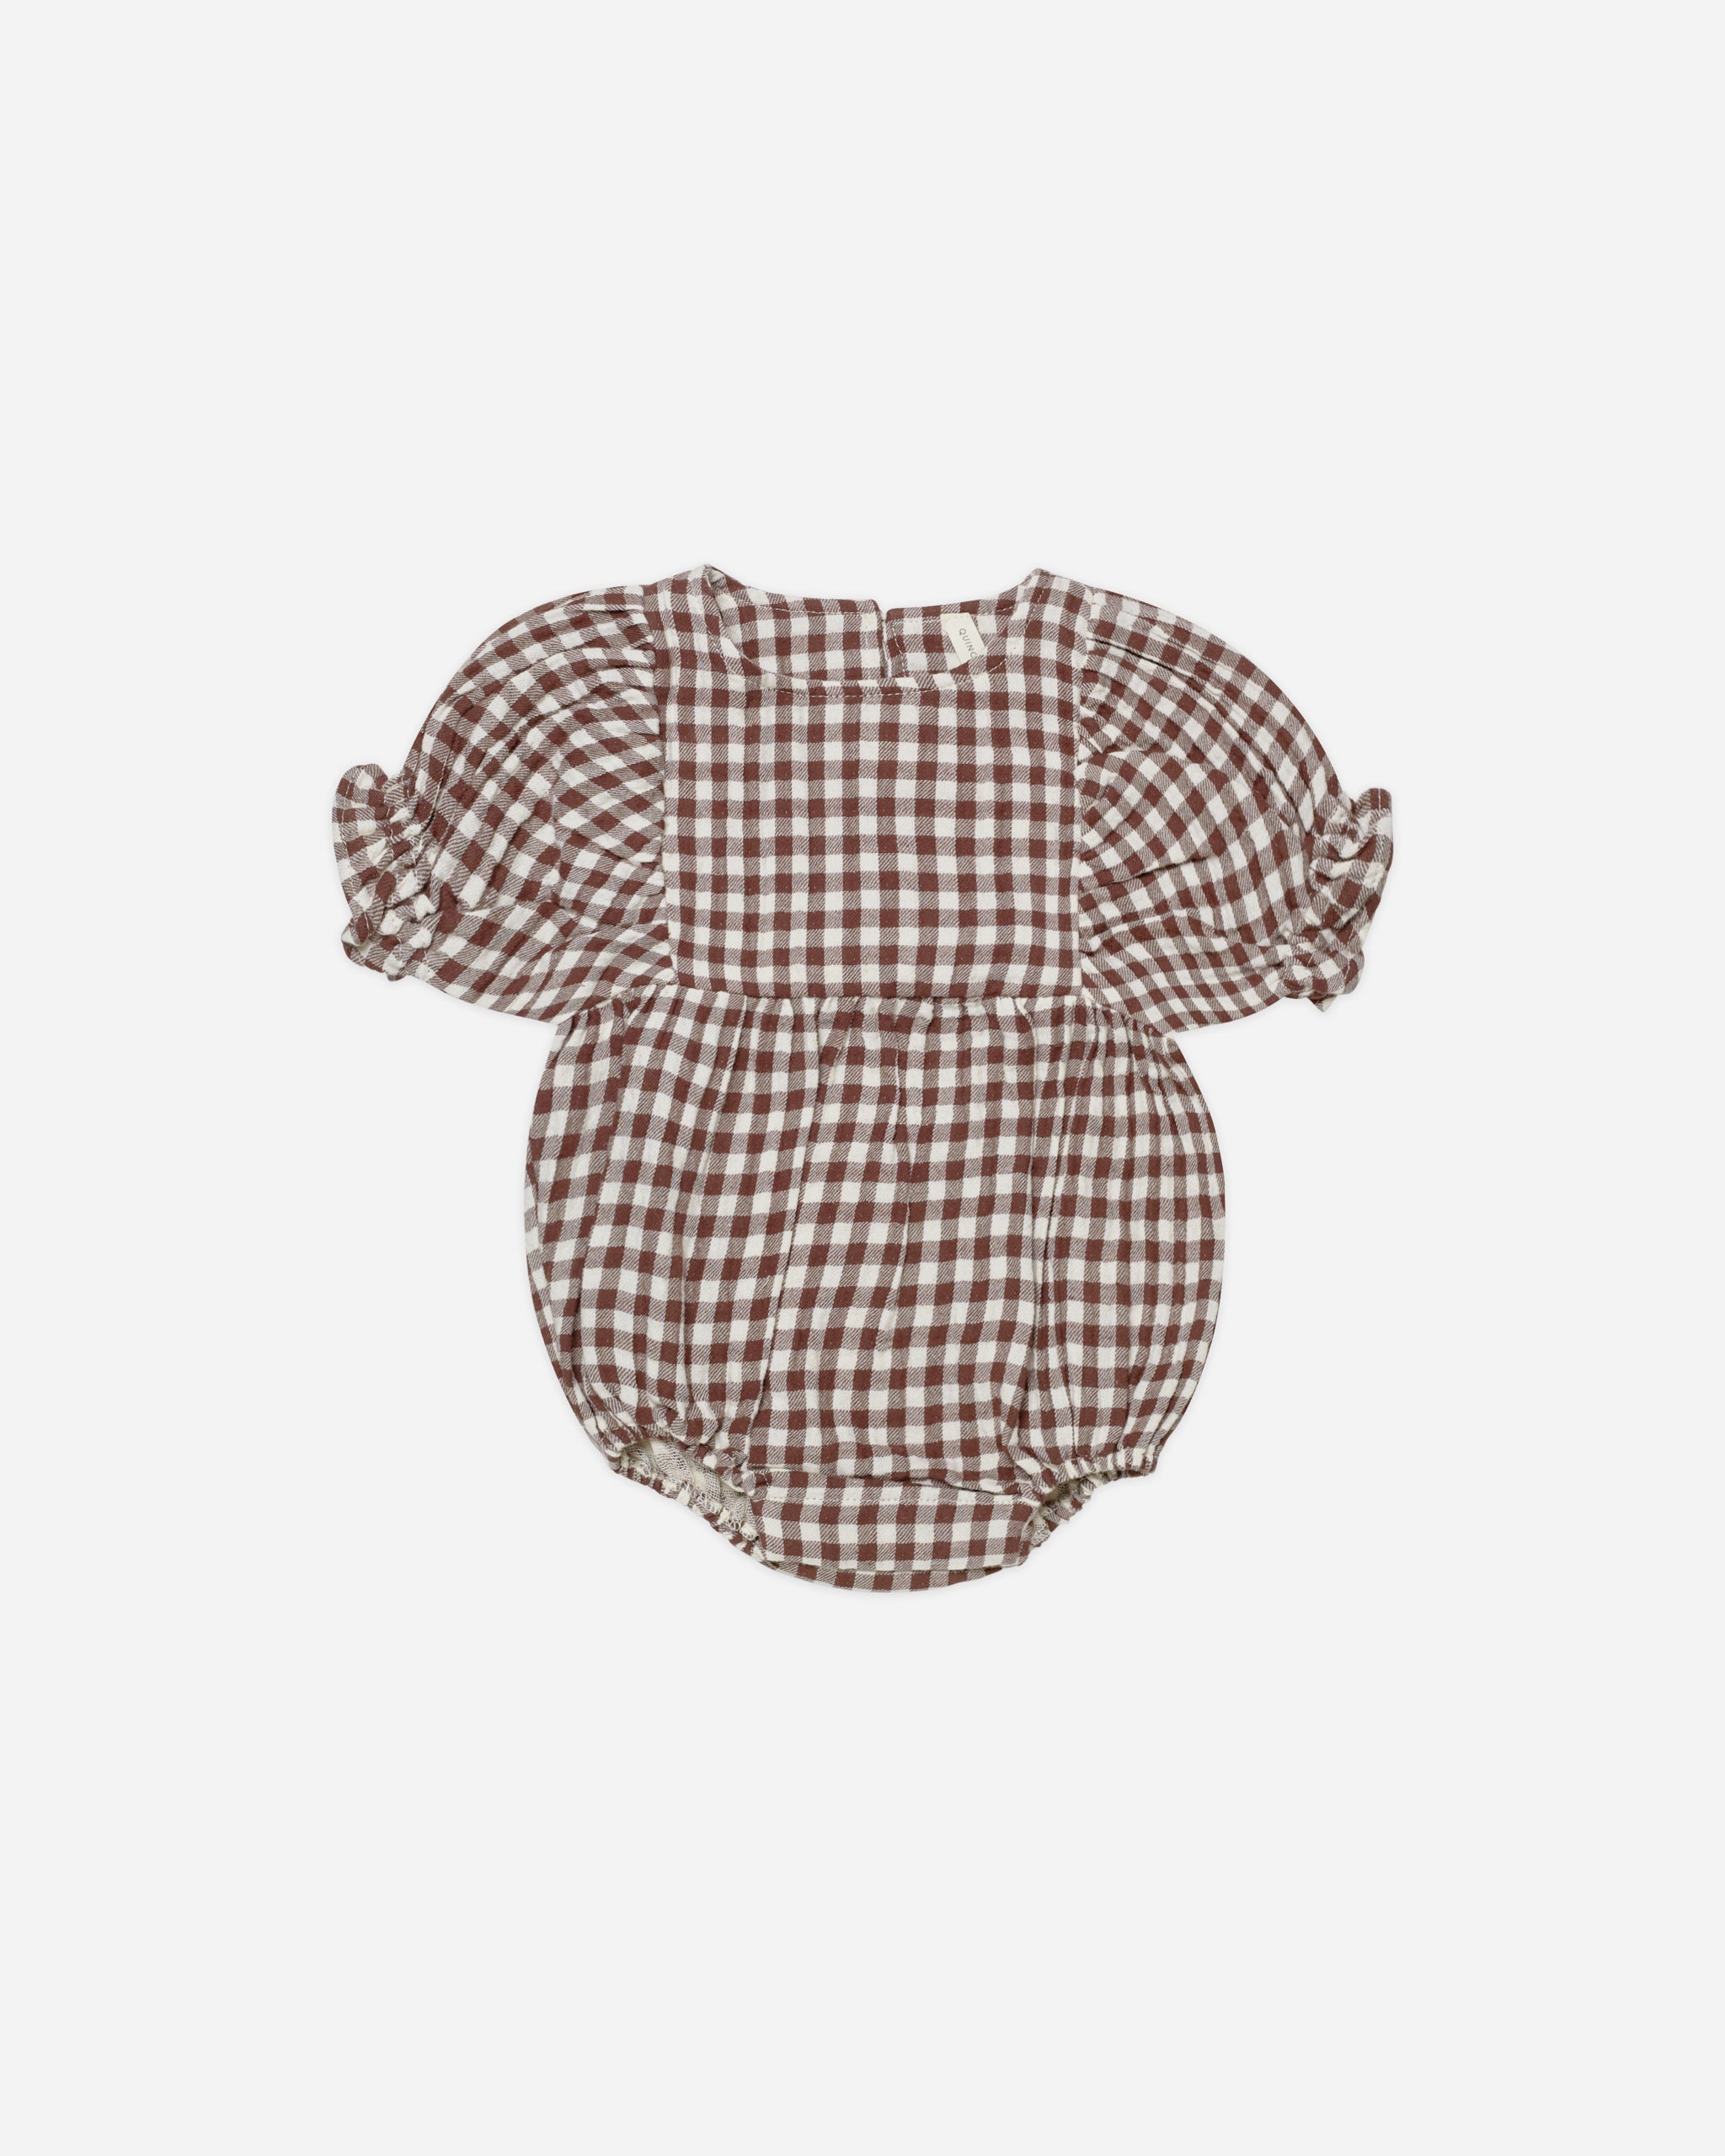 Cosette Romper || Plum Gingham - Rylee + Cru | Kids Clothes | Trendy Baby Clothes | Modern Infant Outfits |